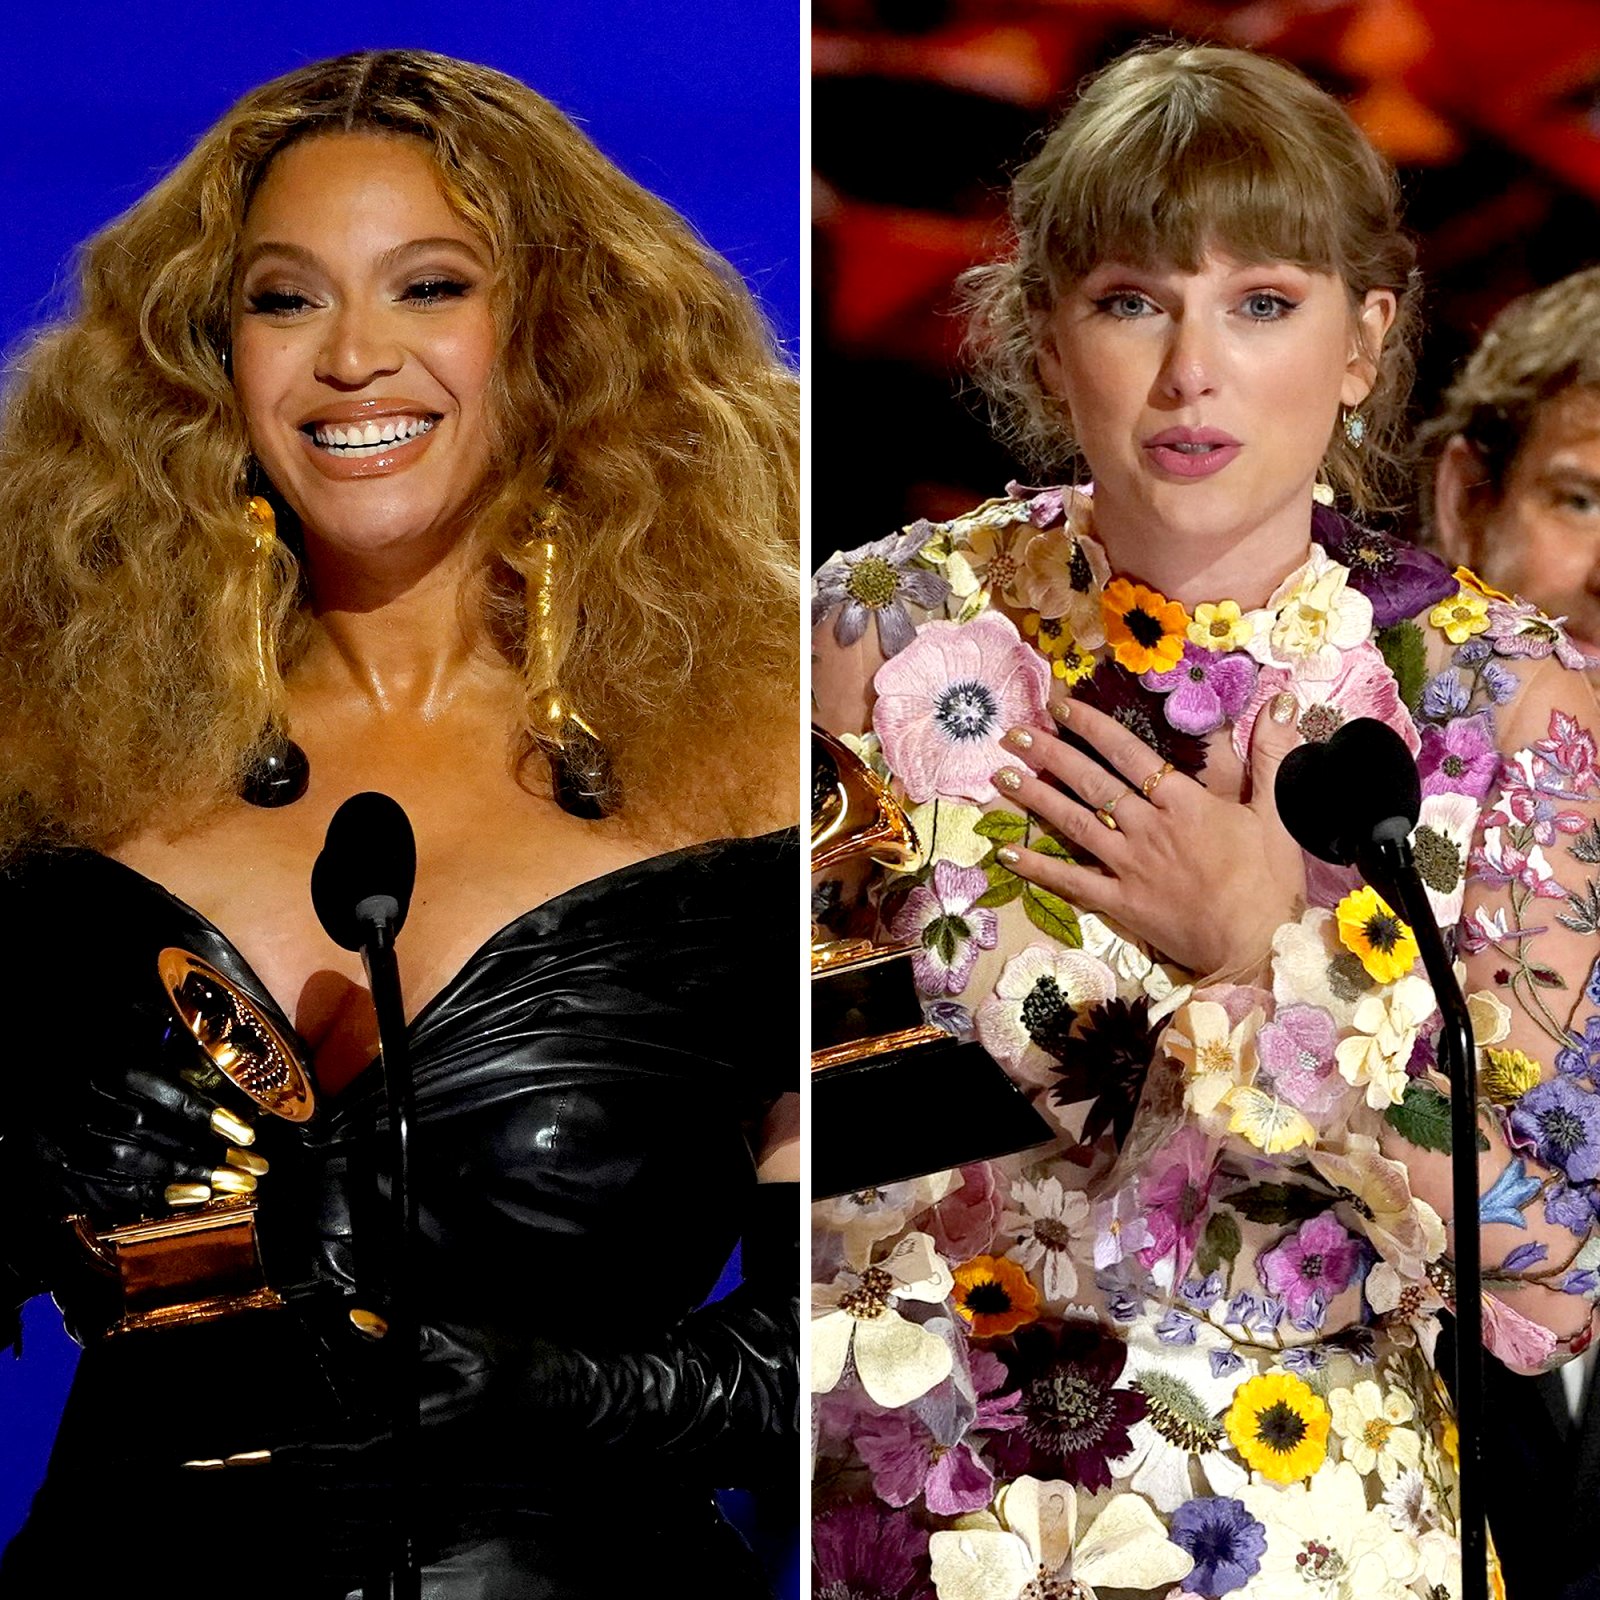 Grammy Awards 2021 Winners and Nominations